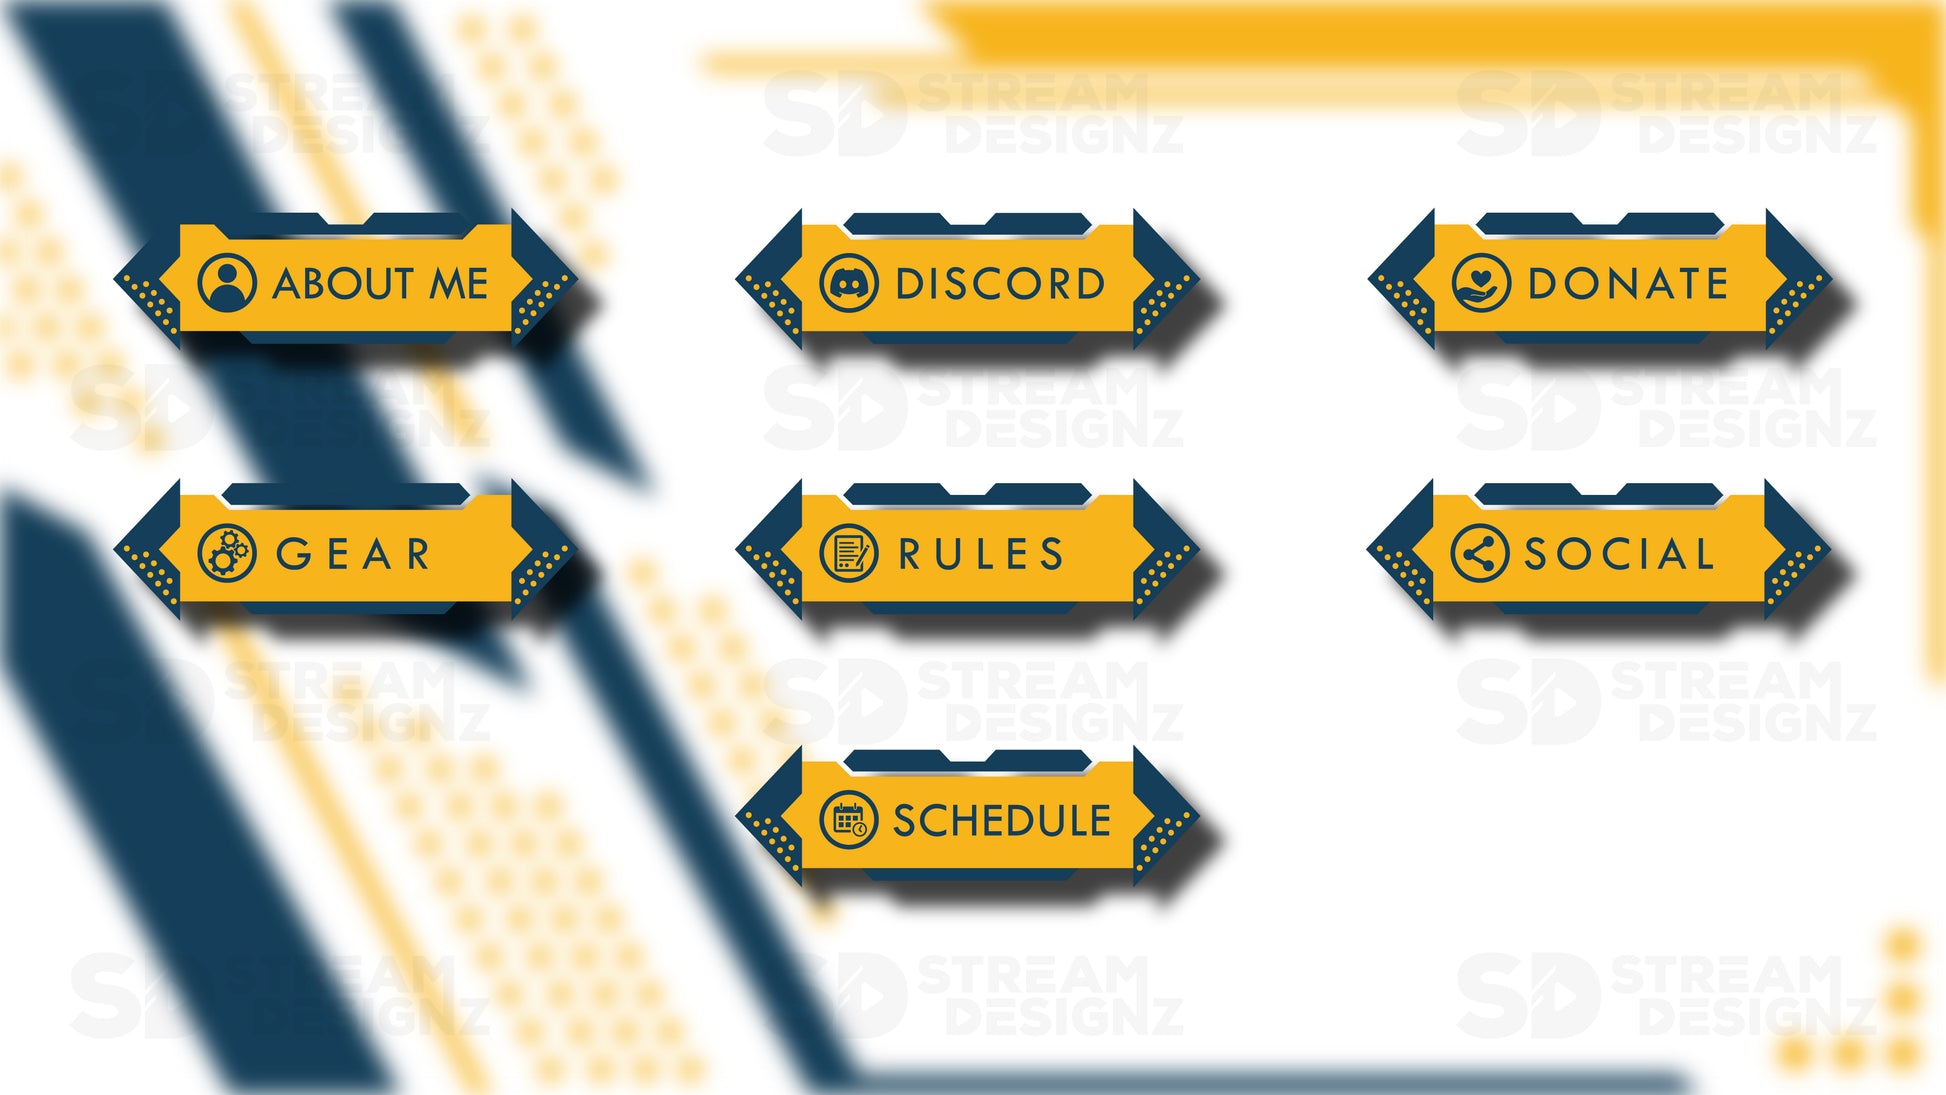 twitch panels sleek yellow and blue preview image stream designz